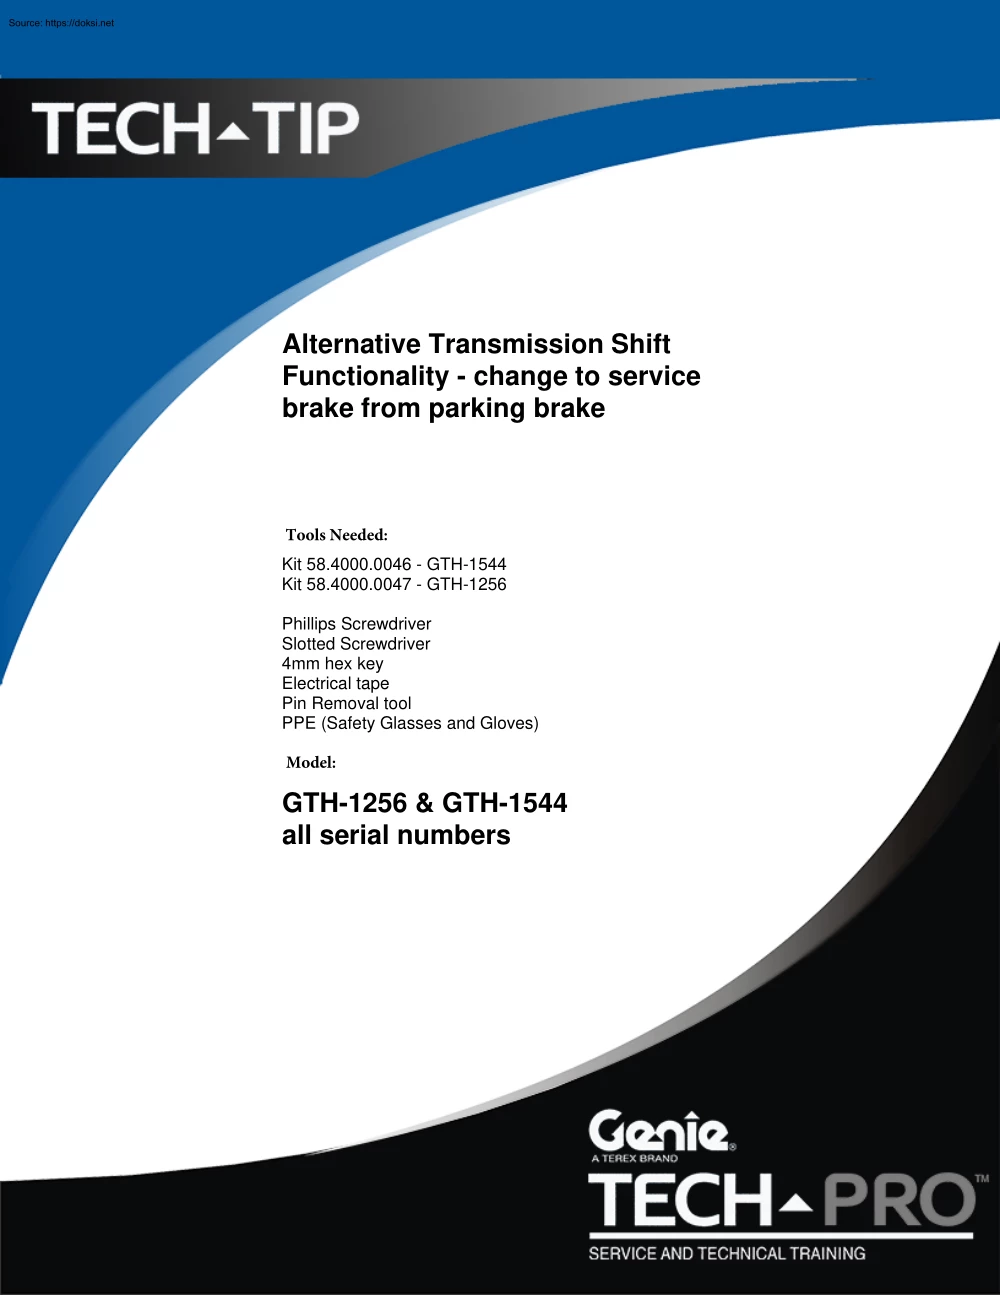 Alternative Transmission Shift Functionality, Change to Service Brake from Parking Brake, GTH-1256, GTH-1544